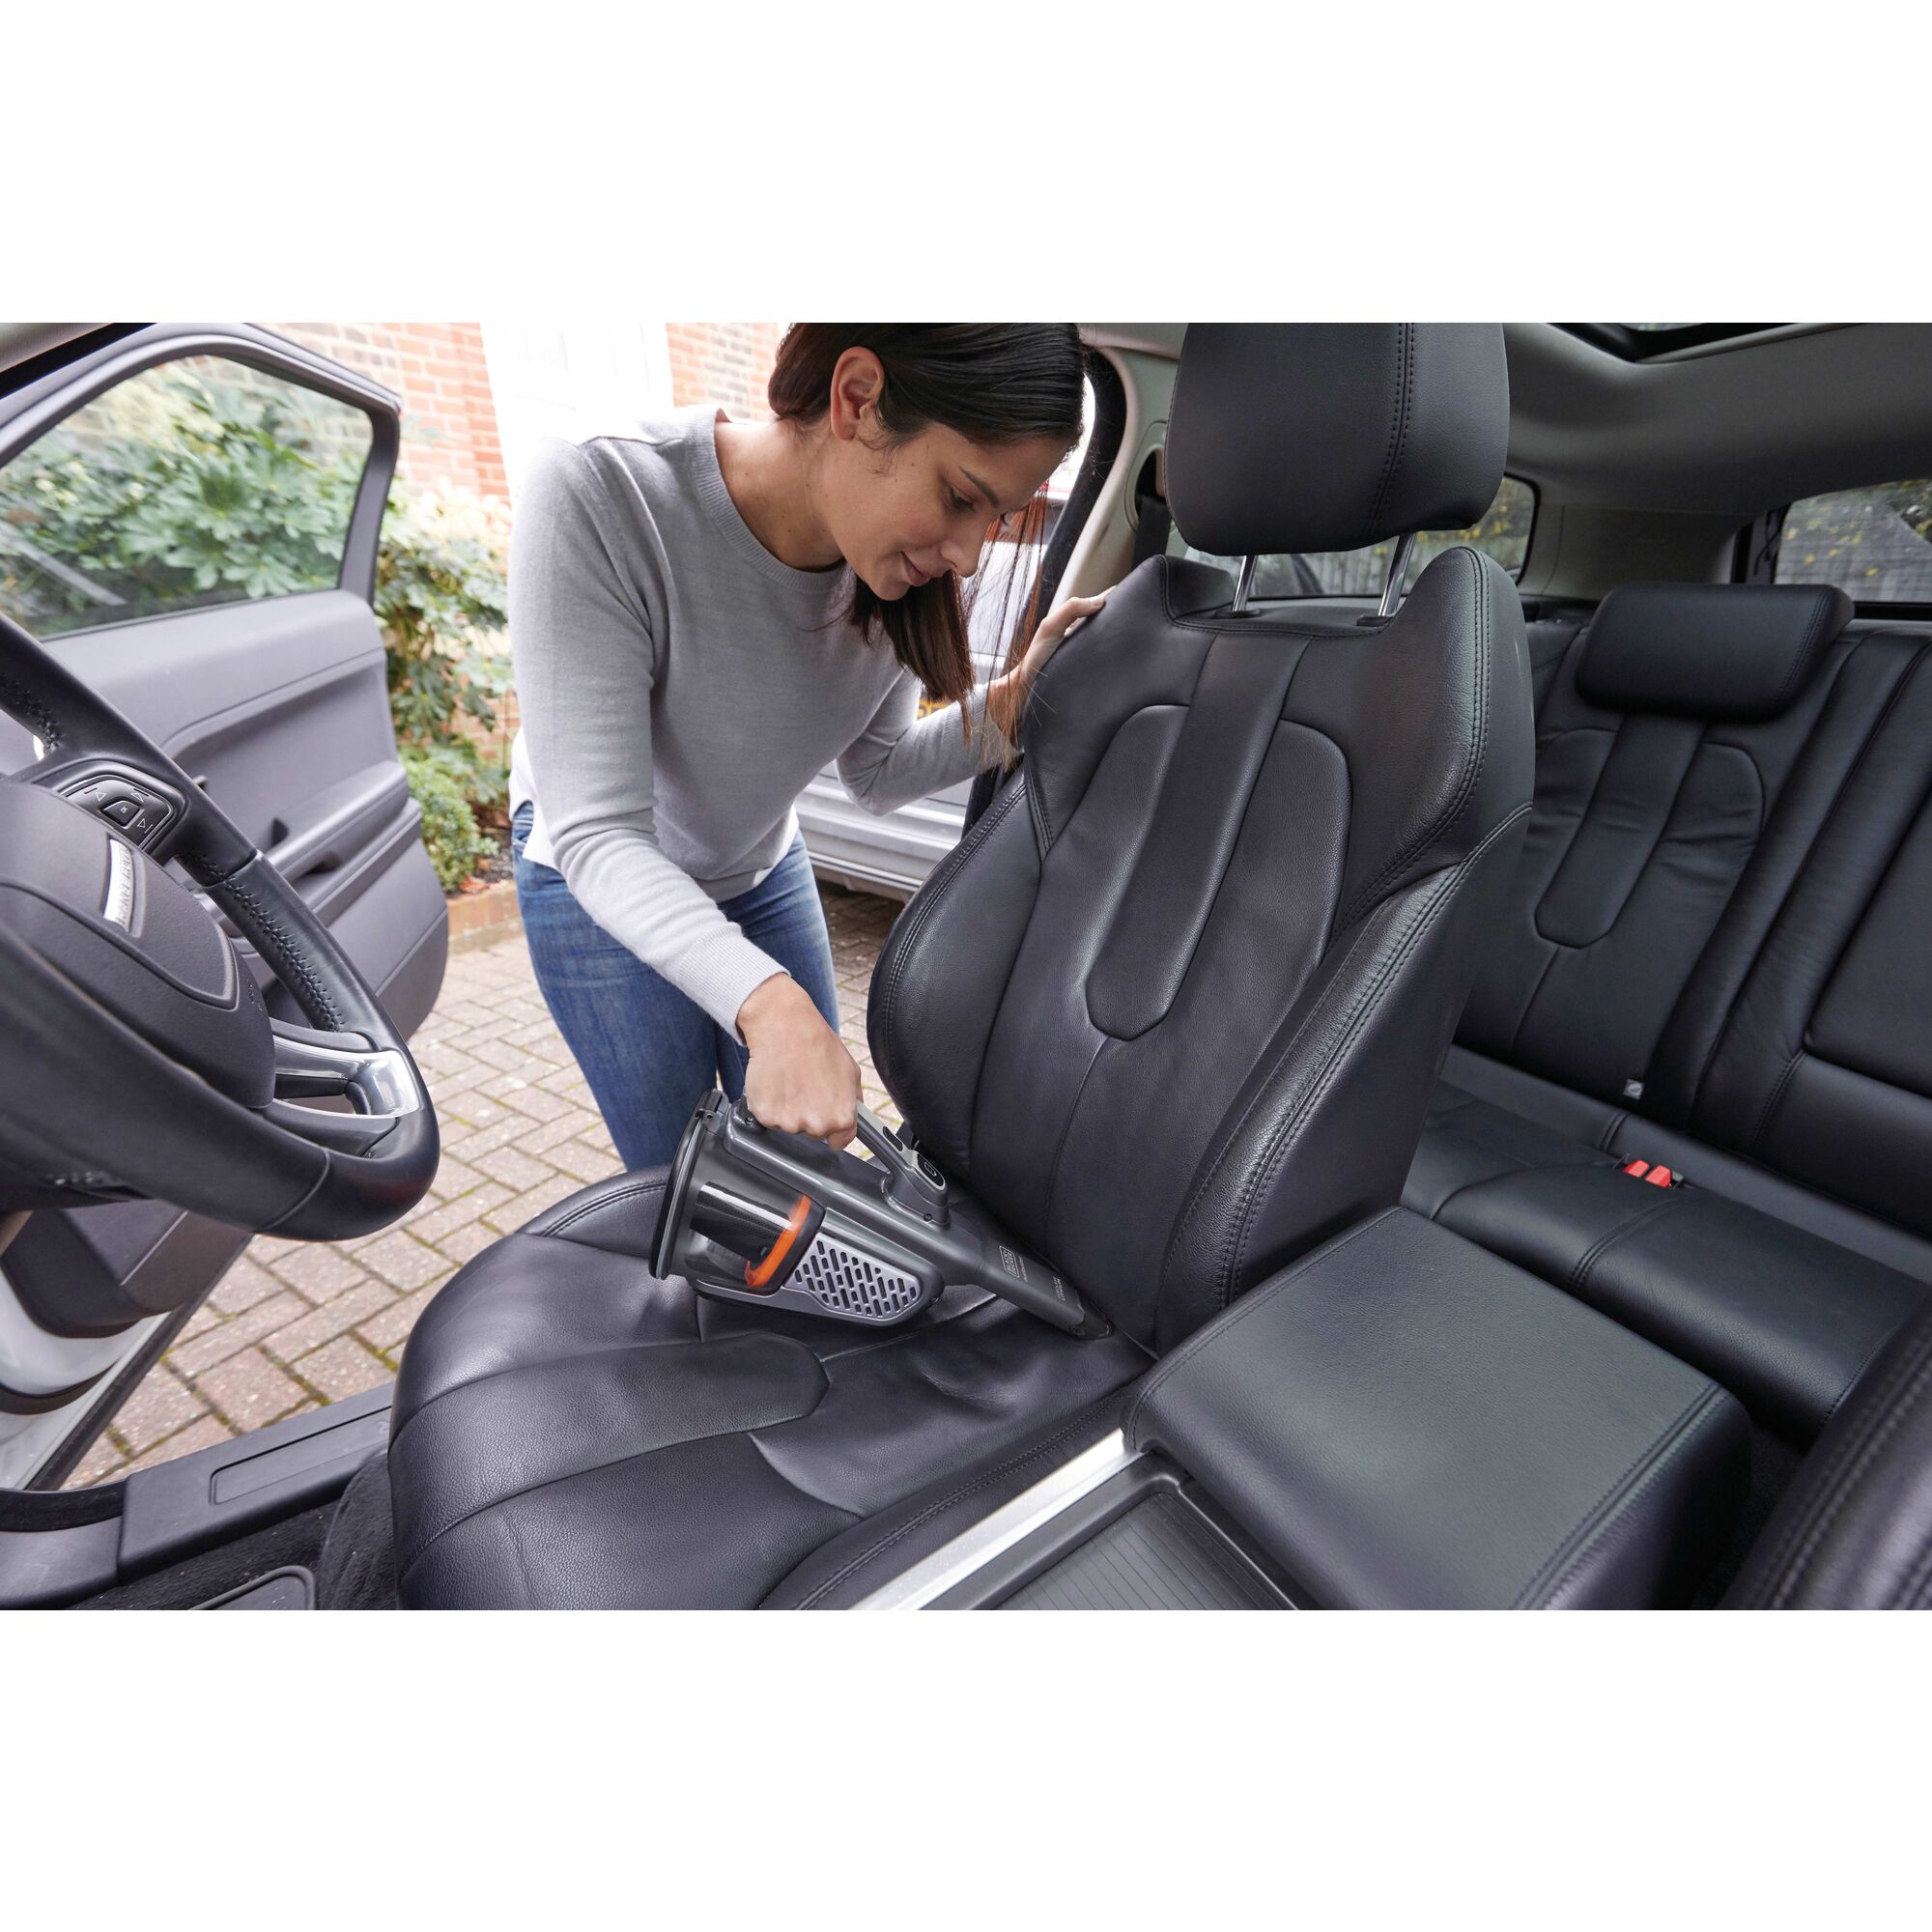 16 volt max dustbuster advanced clean plus hand vacuum being used to vacuum a car seat by a person.